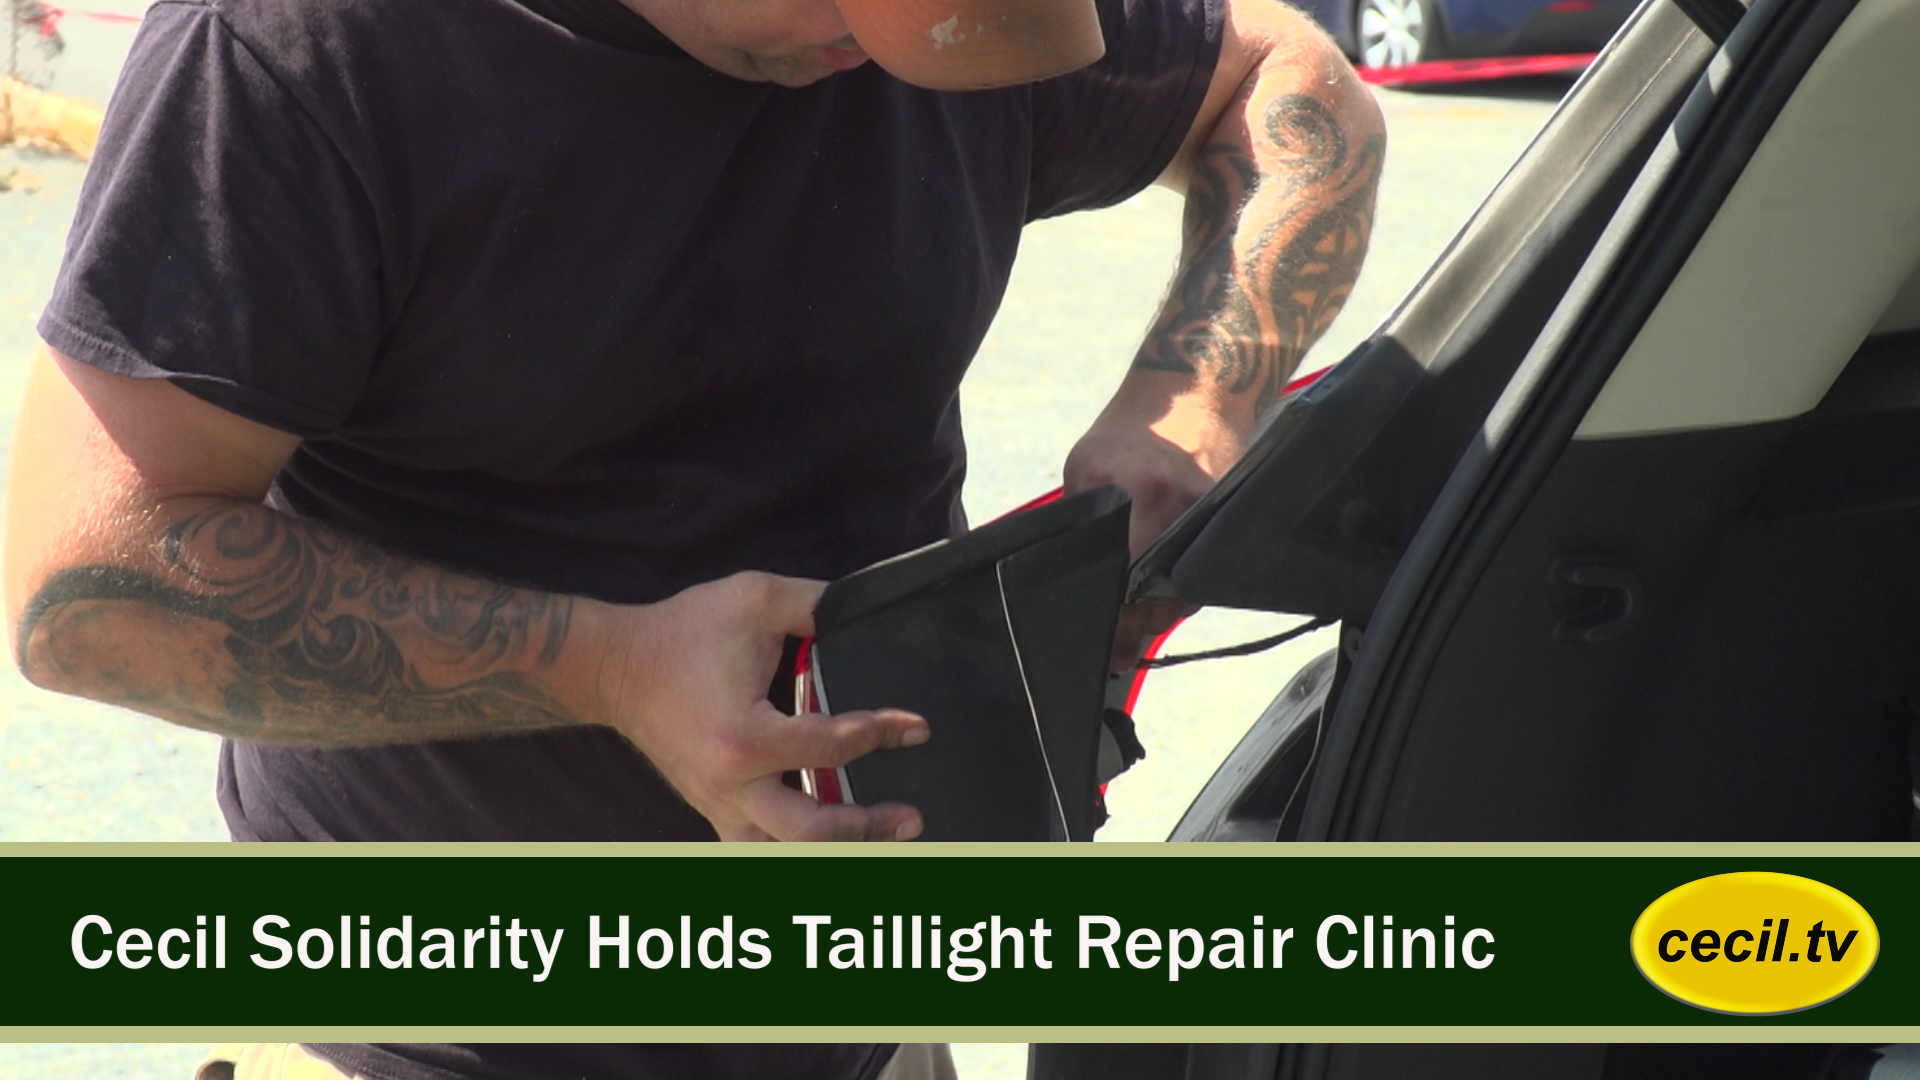 Cecil Solidarity Holds Taillight Repair Clinic